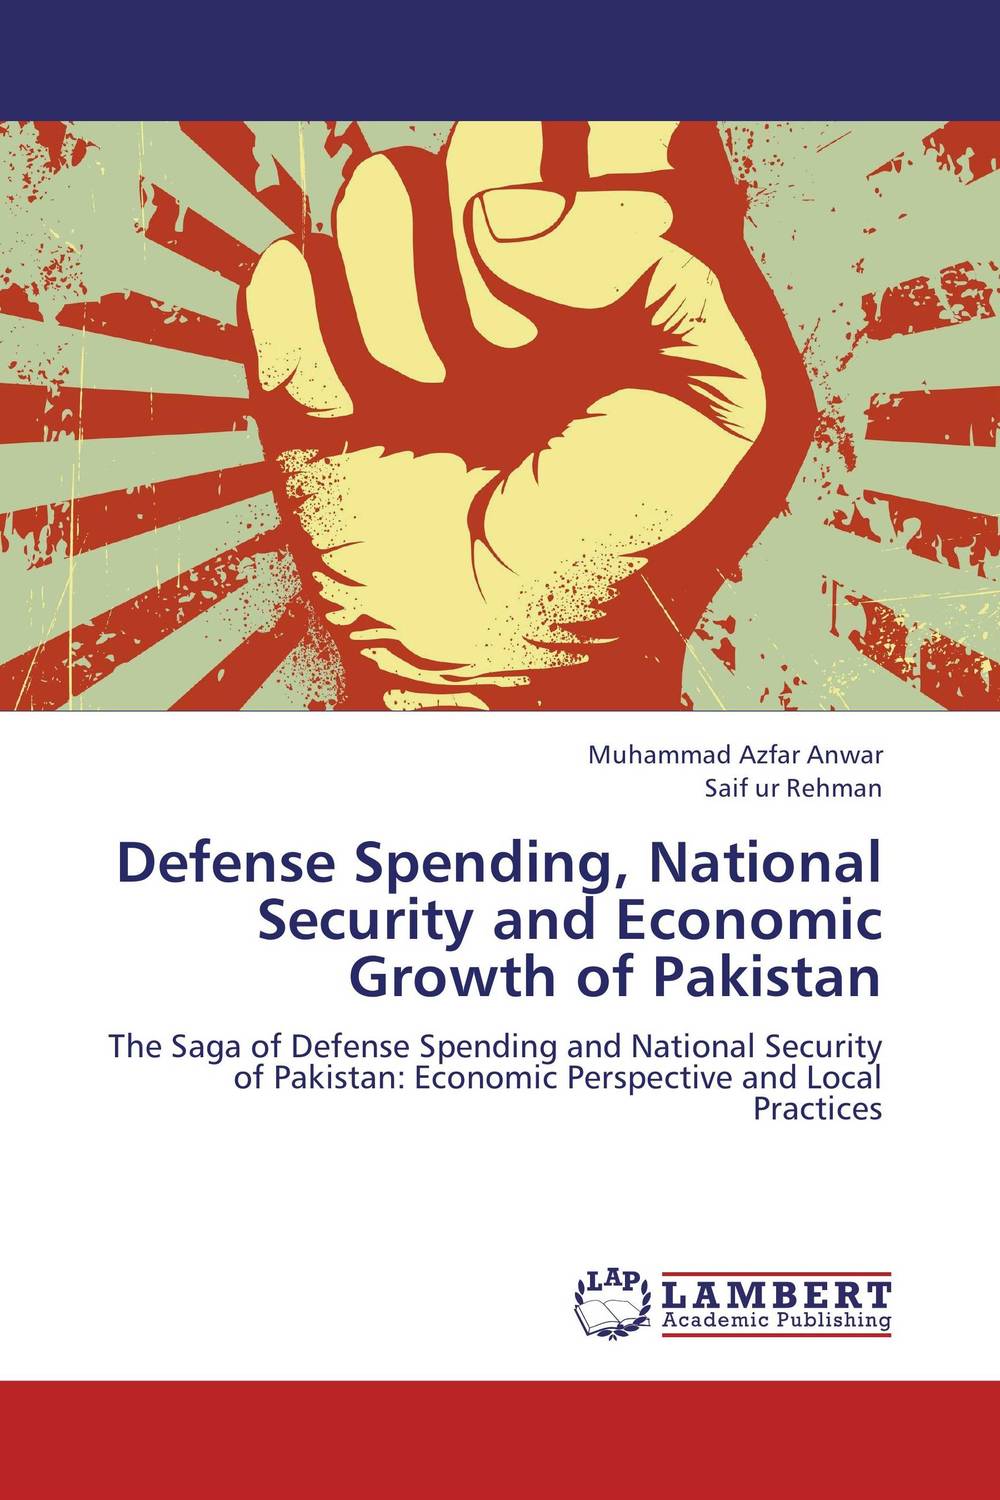 Defense Spending, National Security and Economic Growth of Pakistan